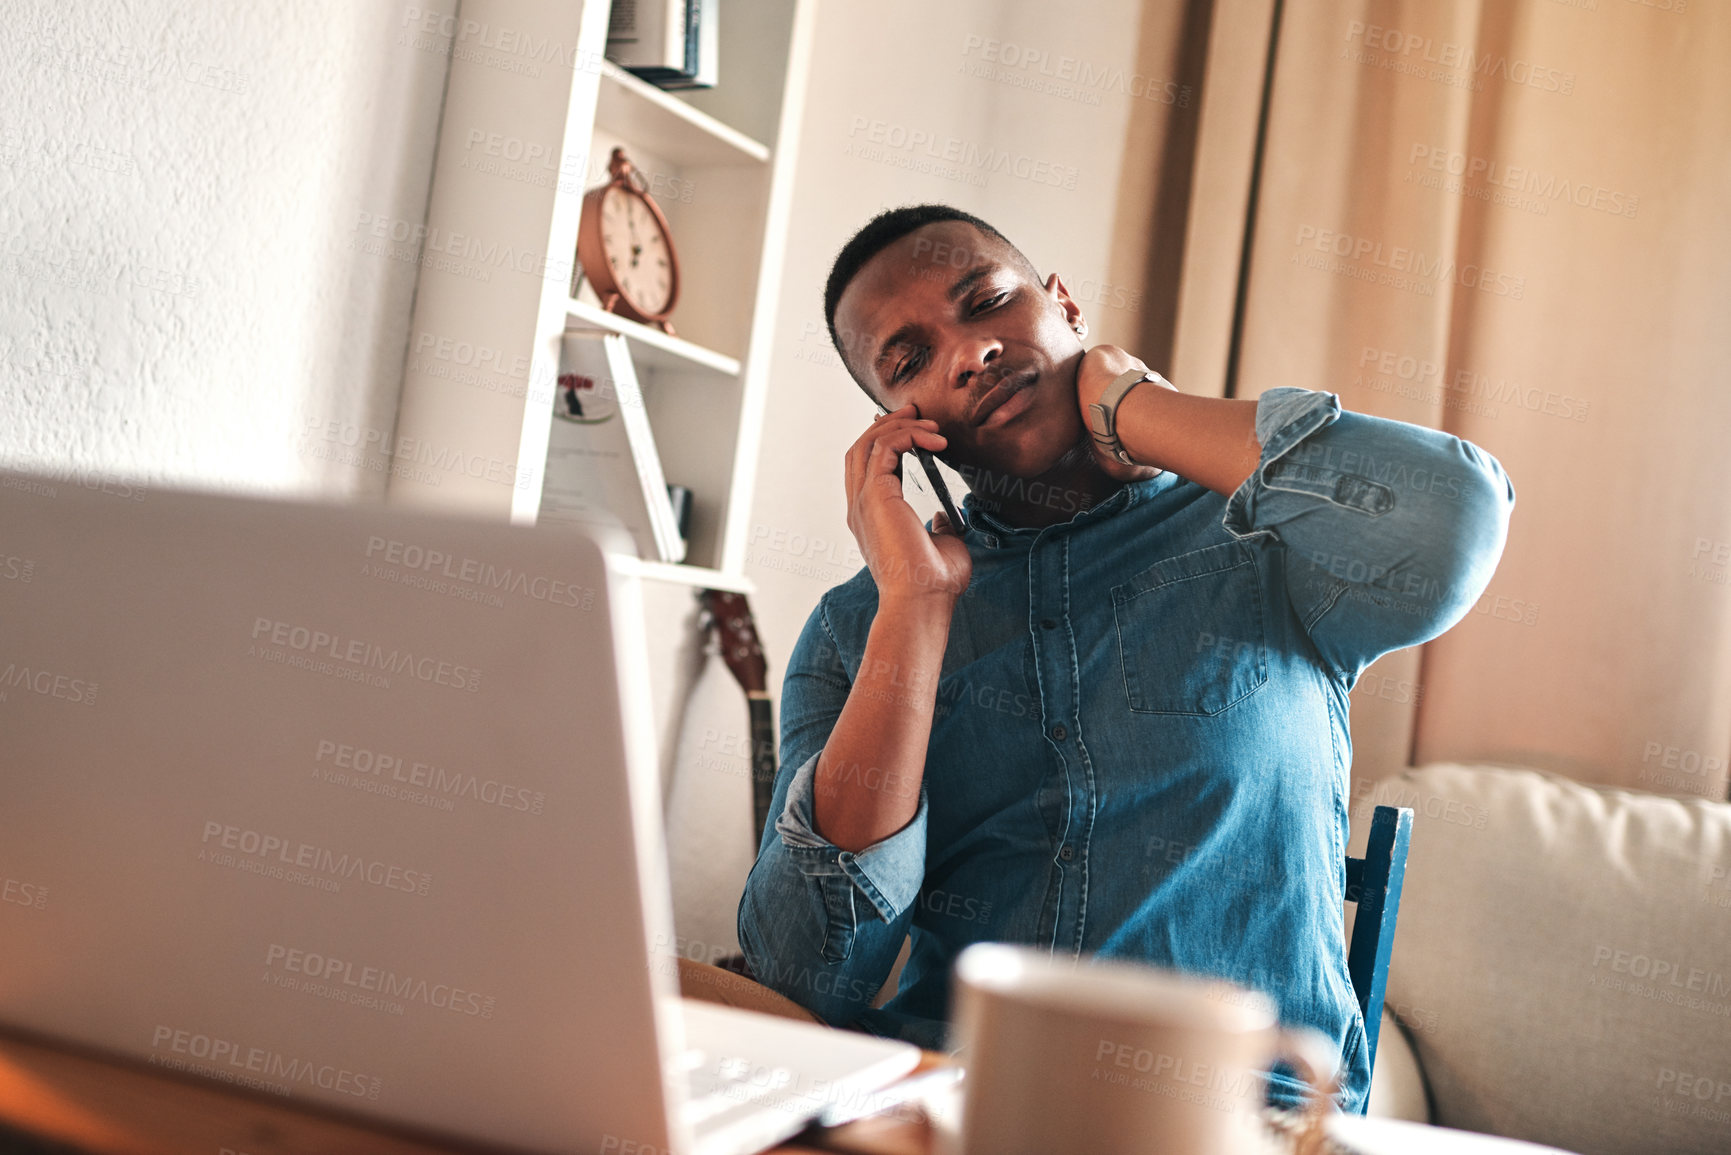 Buy stock photo Headache, stress and pain while talking on a phone call and working from a laptop at home. Worried, anxious man rushing to meet a deadline, looking unhappy while suffering from neck pain and tension